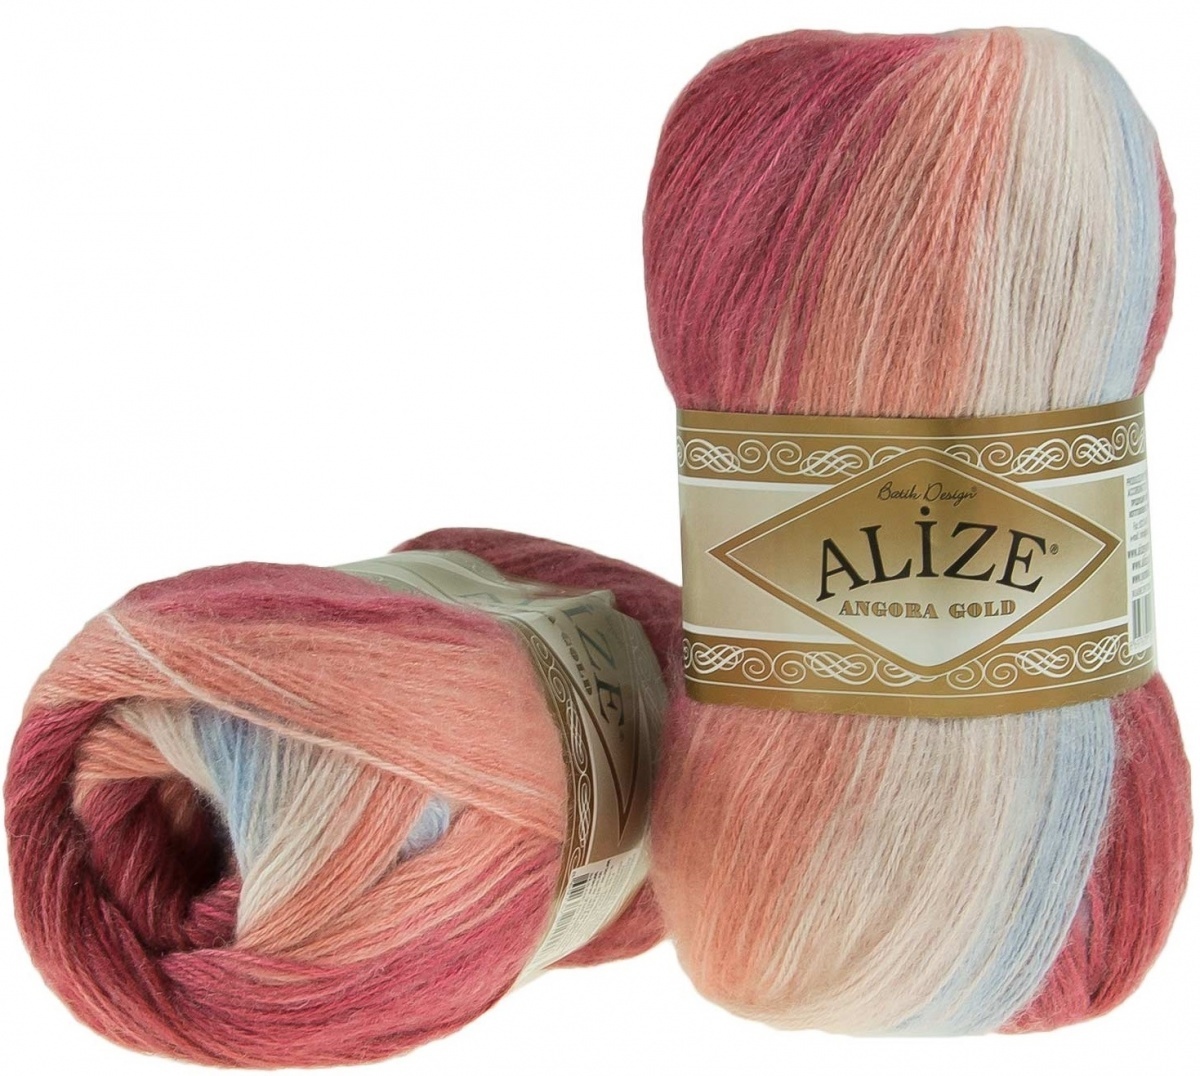 Alize Angora Gold Batik, 10% mohair, 10% wool, 80% acrylic 5 Skein Value Pack, 500g фото 3